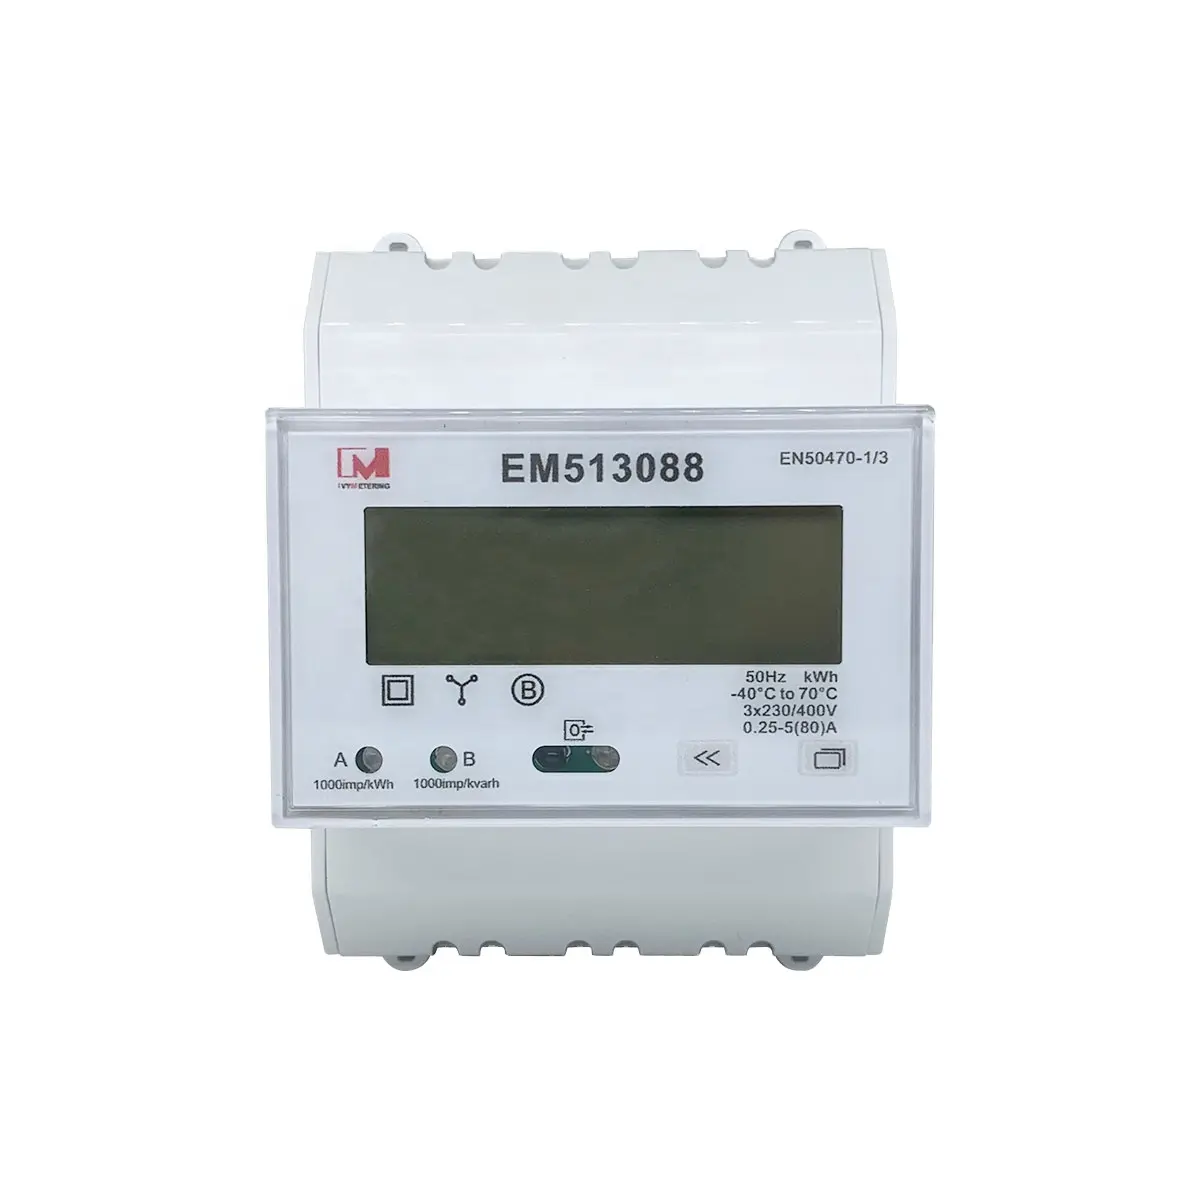 M-bus kwh digital 3phase three-phase competitive price 3ph electronic power meter mbus